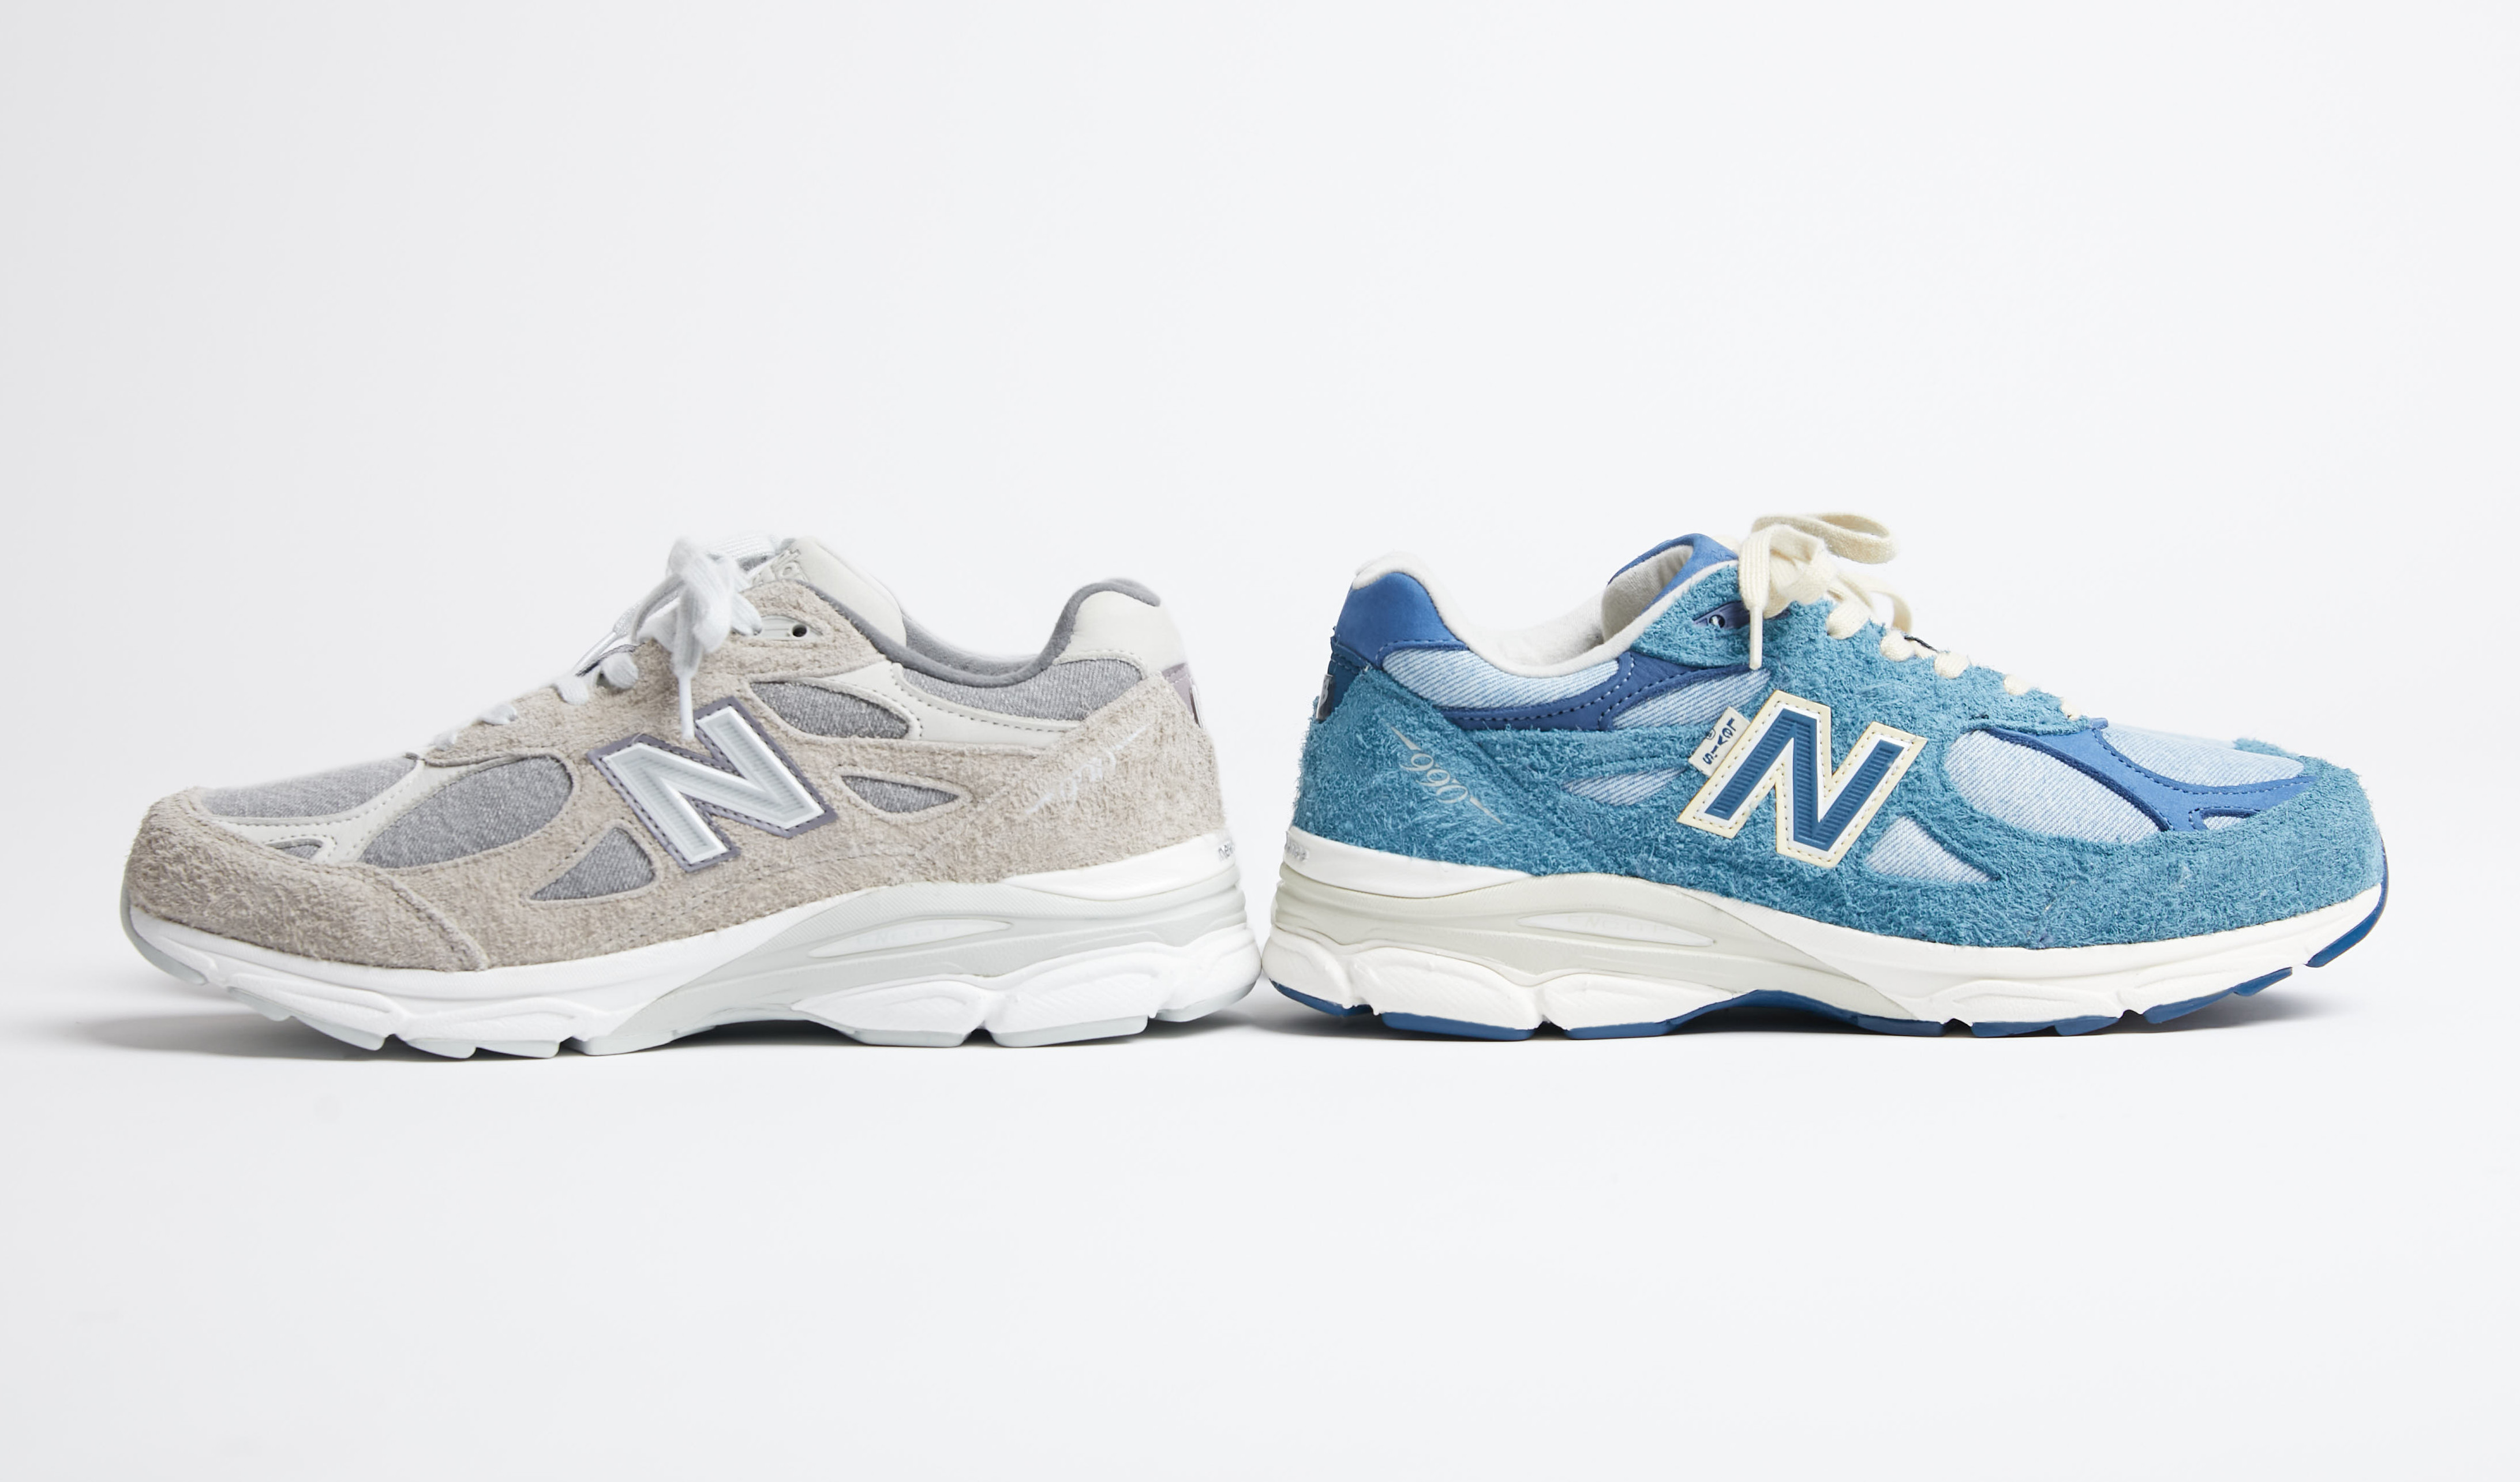 Levi's x New Balance 990v3 Sneaker Collaboration Release Date ...